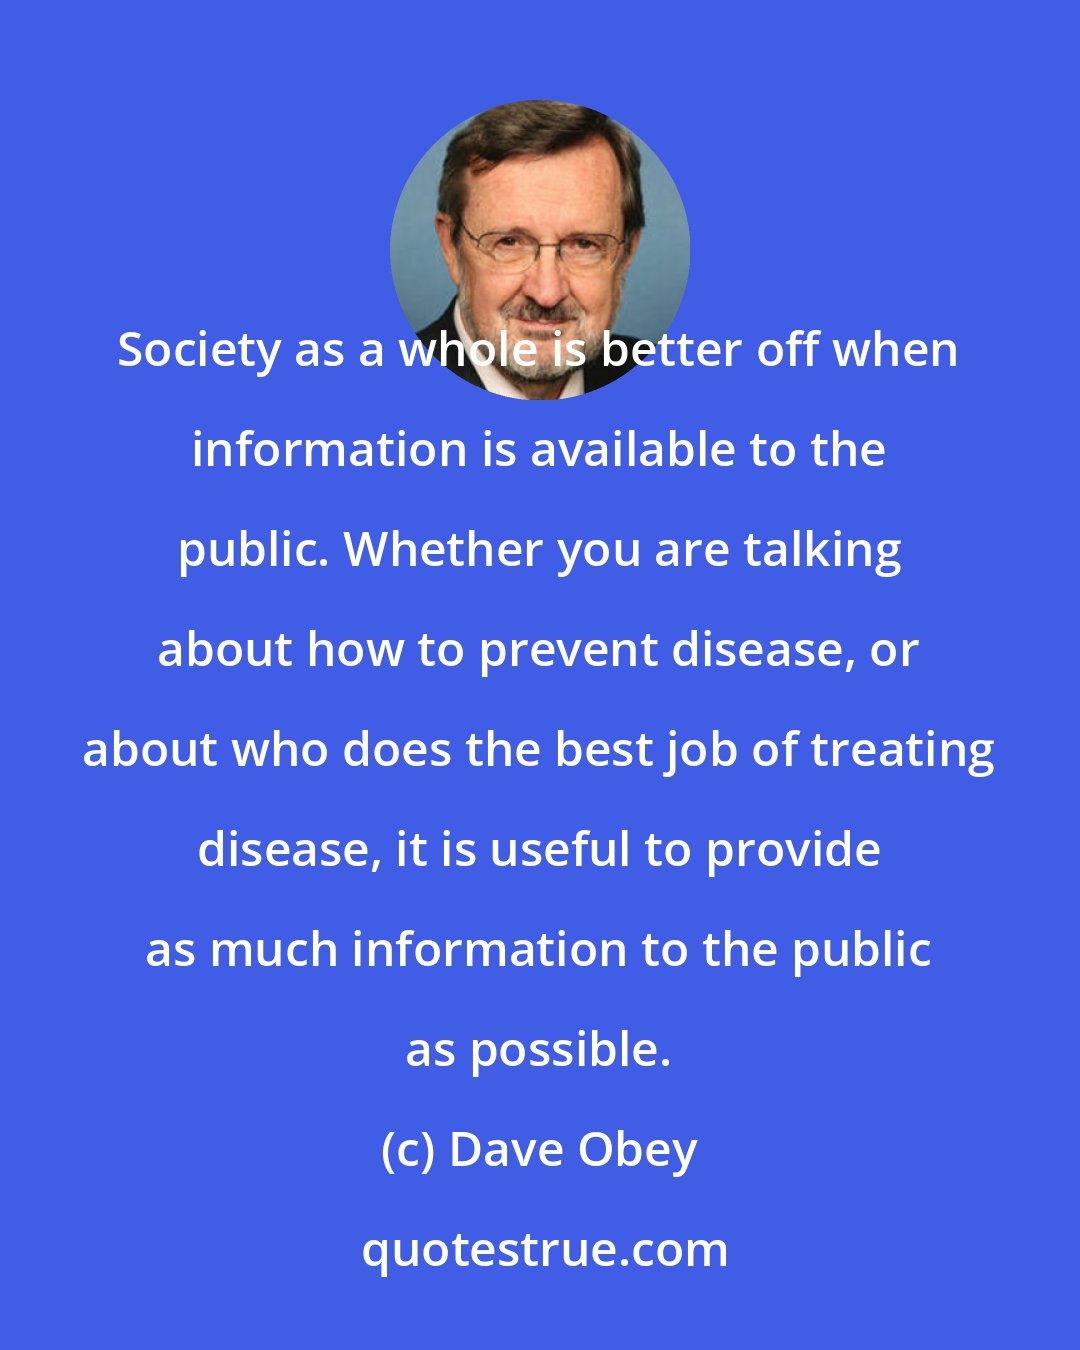 Dave Obey: Society as a whole is better off when information is available to the public. Whether you are talking about how to prevent disease, or about who does the best job of treating disease, it is useful to provide as much information to the public as possible.